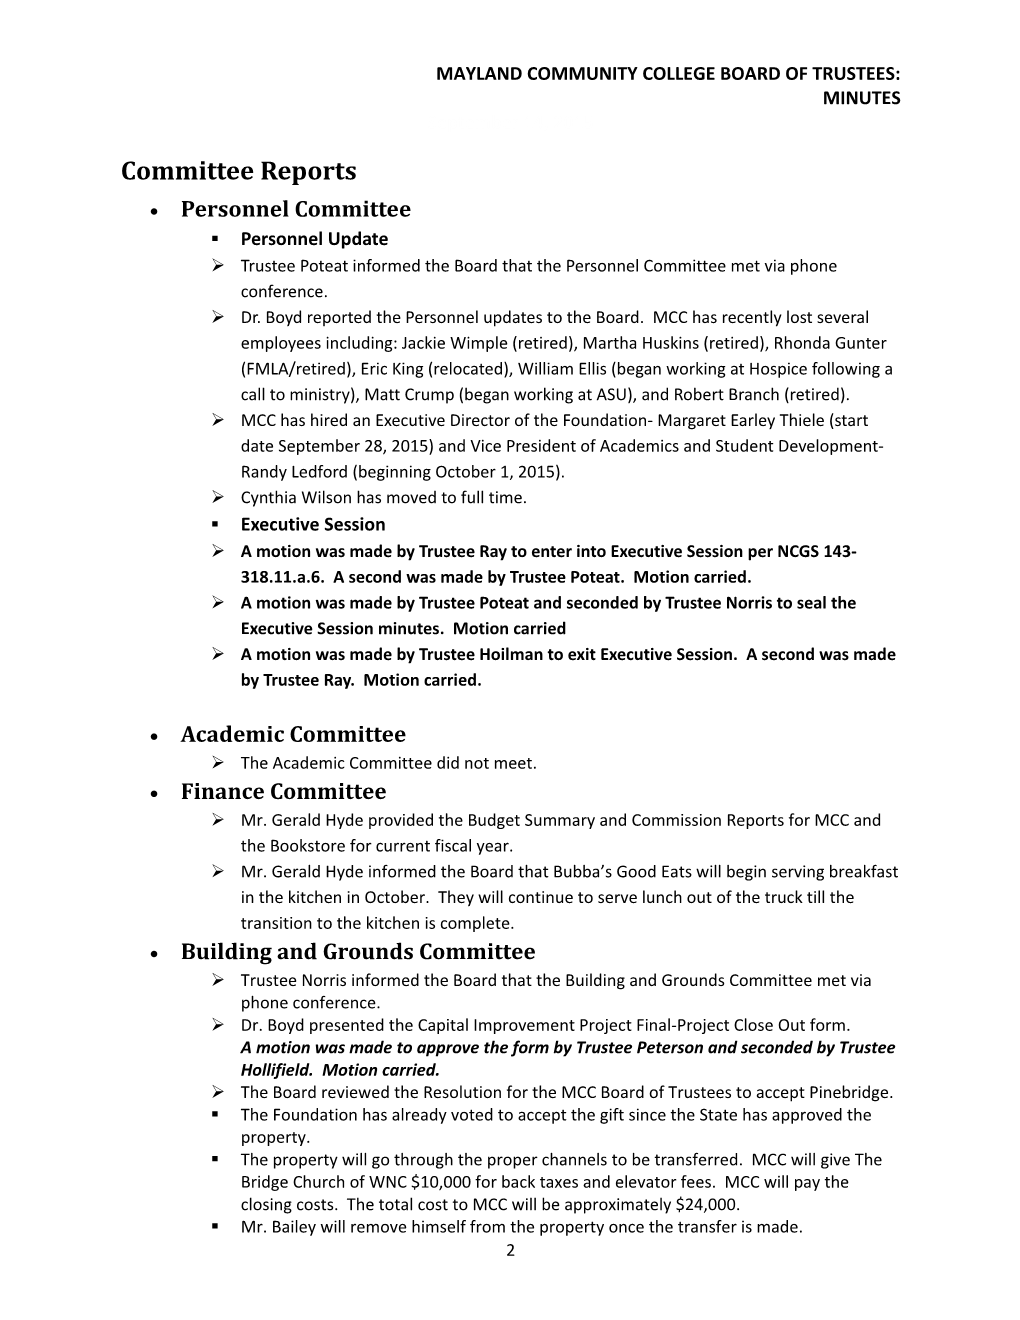 Mayland Community College Board of Trustees Minutes